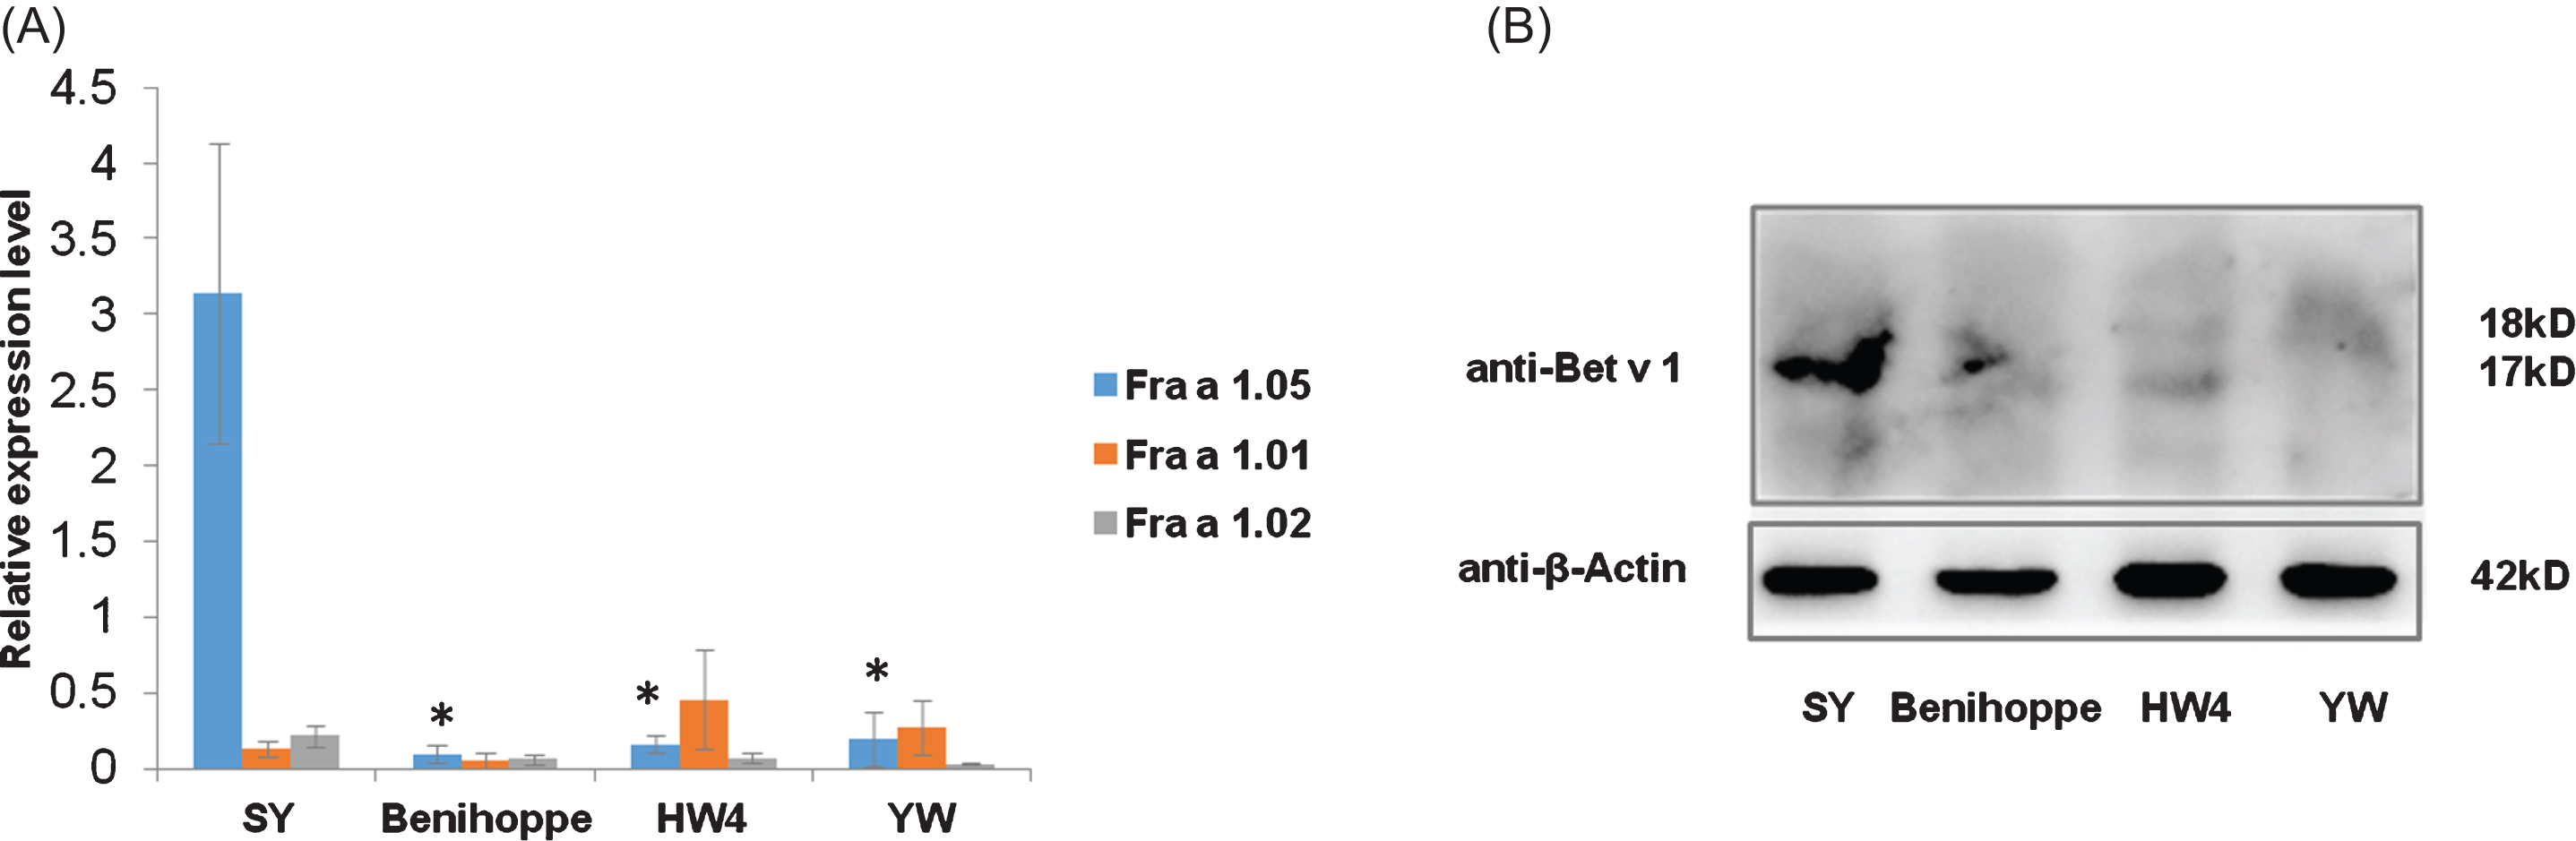 Measurement of potential allergen levels in four strawberry varieties. (A) Relative mRNA levels of Fra a 1.05, Fra a 1.01 and Fra a 1.02 in Benihoppe, SY, YW and HW4 measured by qRT-PCR. Data were shown as mean±standard deviation from three biological and three technical replicates. Asterisks indicated statistically significant differences (Student’s t-test, *P < 0.01). (B) Bet v 1 protein contents in fruits of Benihoppe, SY, YW and HW4 by immunoblotting analysis. Contents of Bet v 1 possible allergens in 20 ug of total proteins were examined by the antibody of Birch Bet v 1 allergen. Strawberry Bet v 1 homologous proteins were detected at 17∼18 kD. Fruit samples used were generated under the uniform natural conditions instead of artificially inoculated ones.